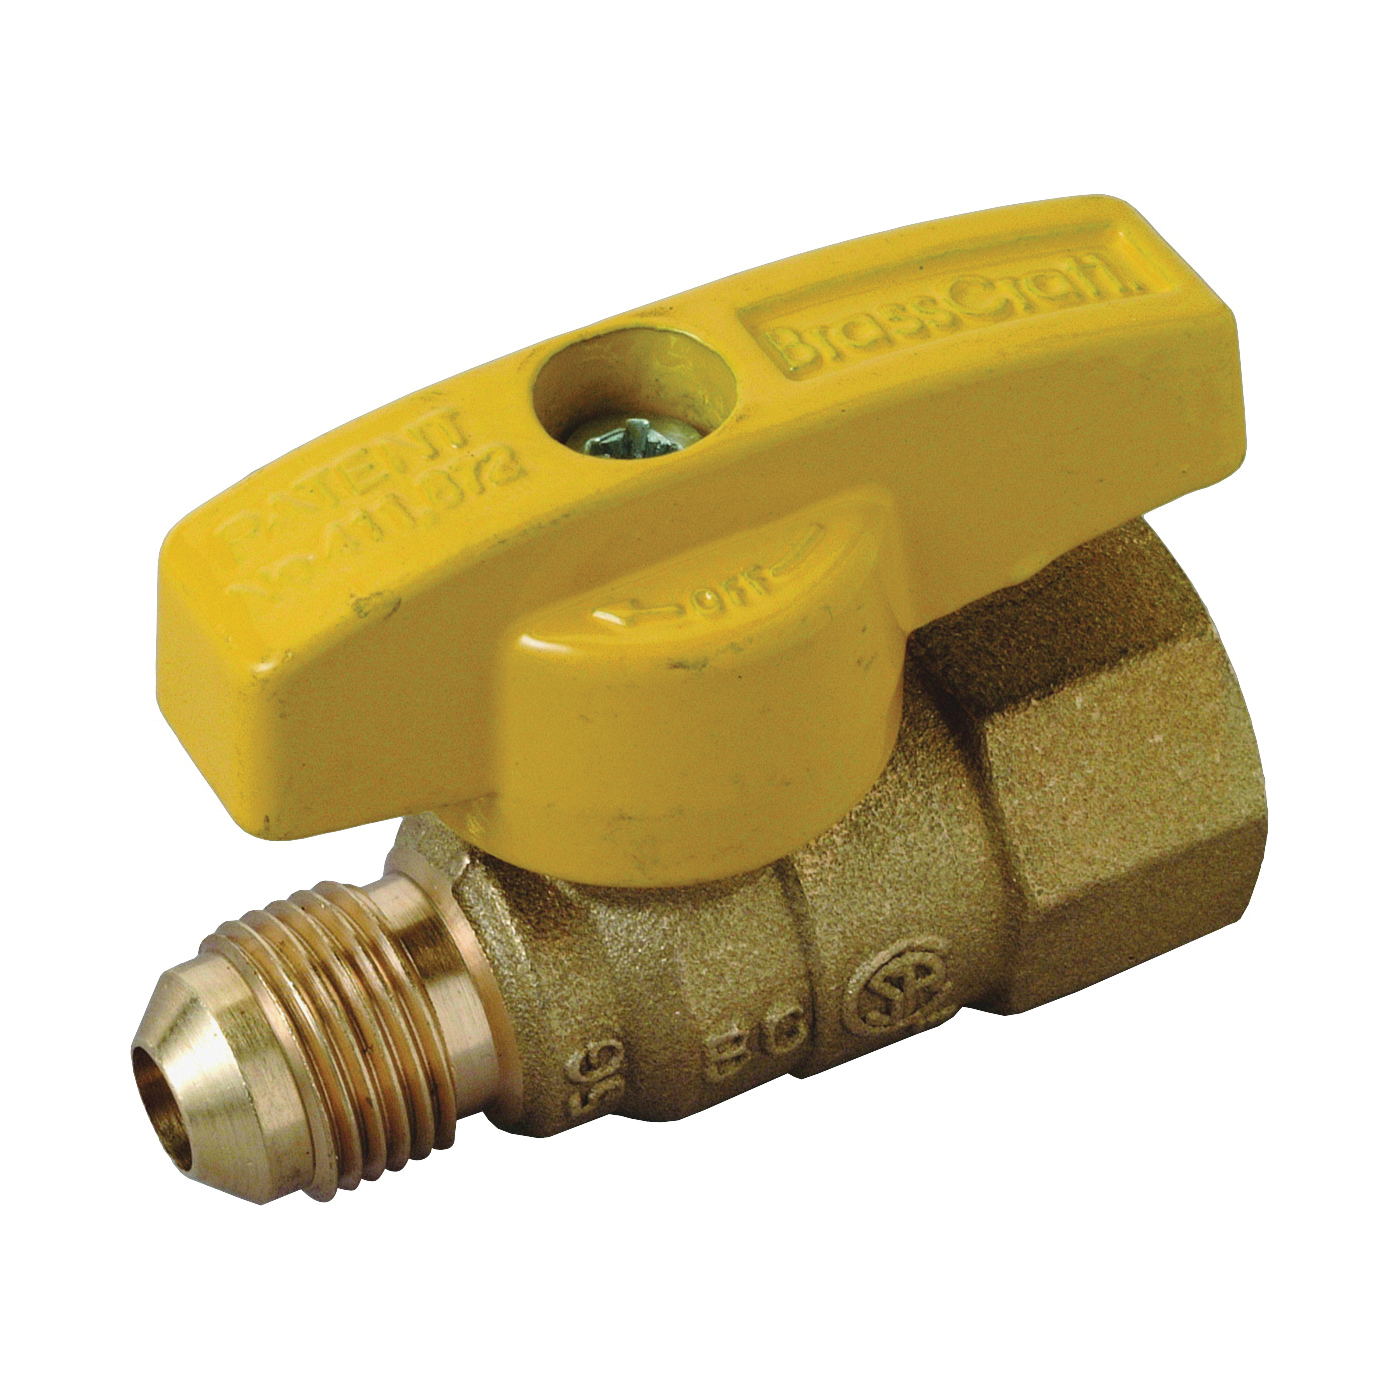 Kit 5 Fuse Mini Ball Valve with Male Thread Pipe 16x1/2" 